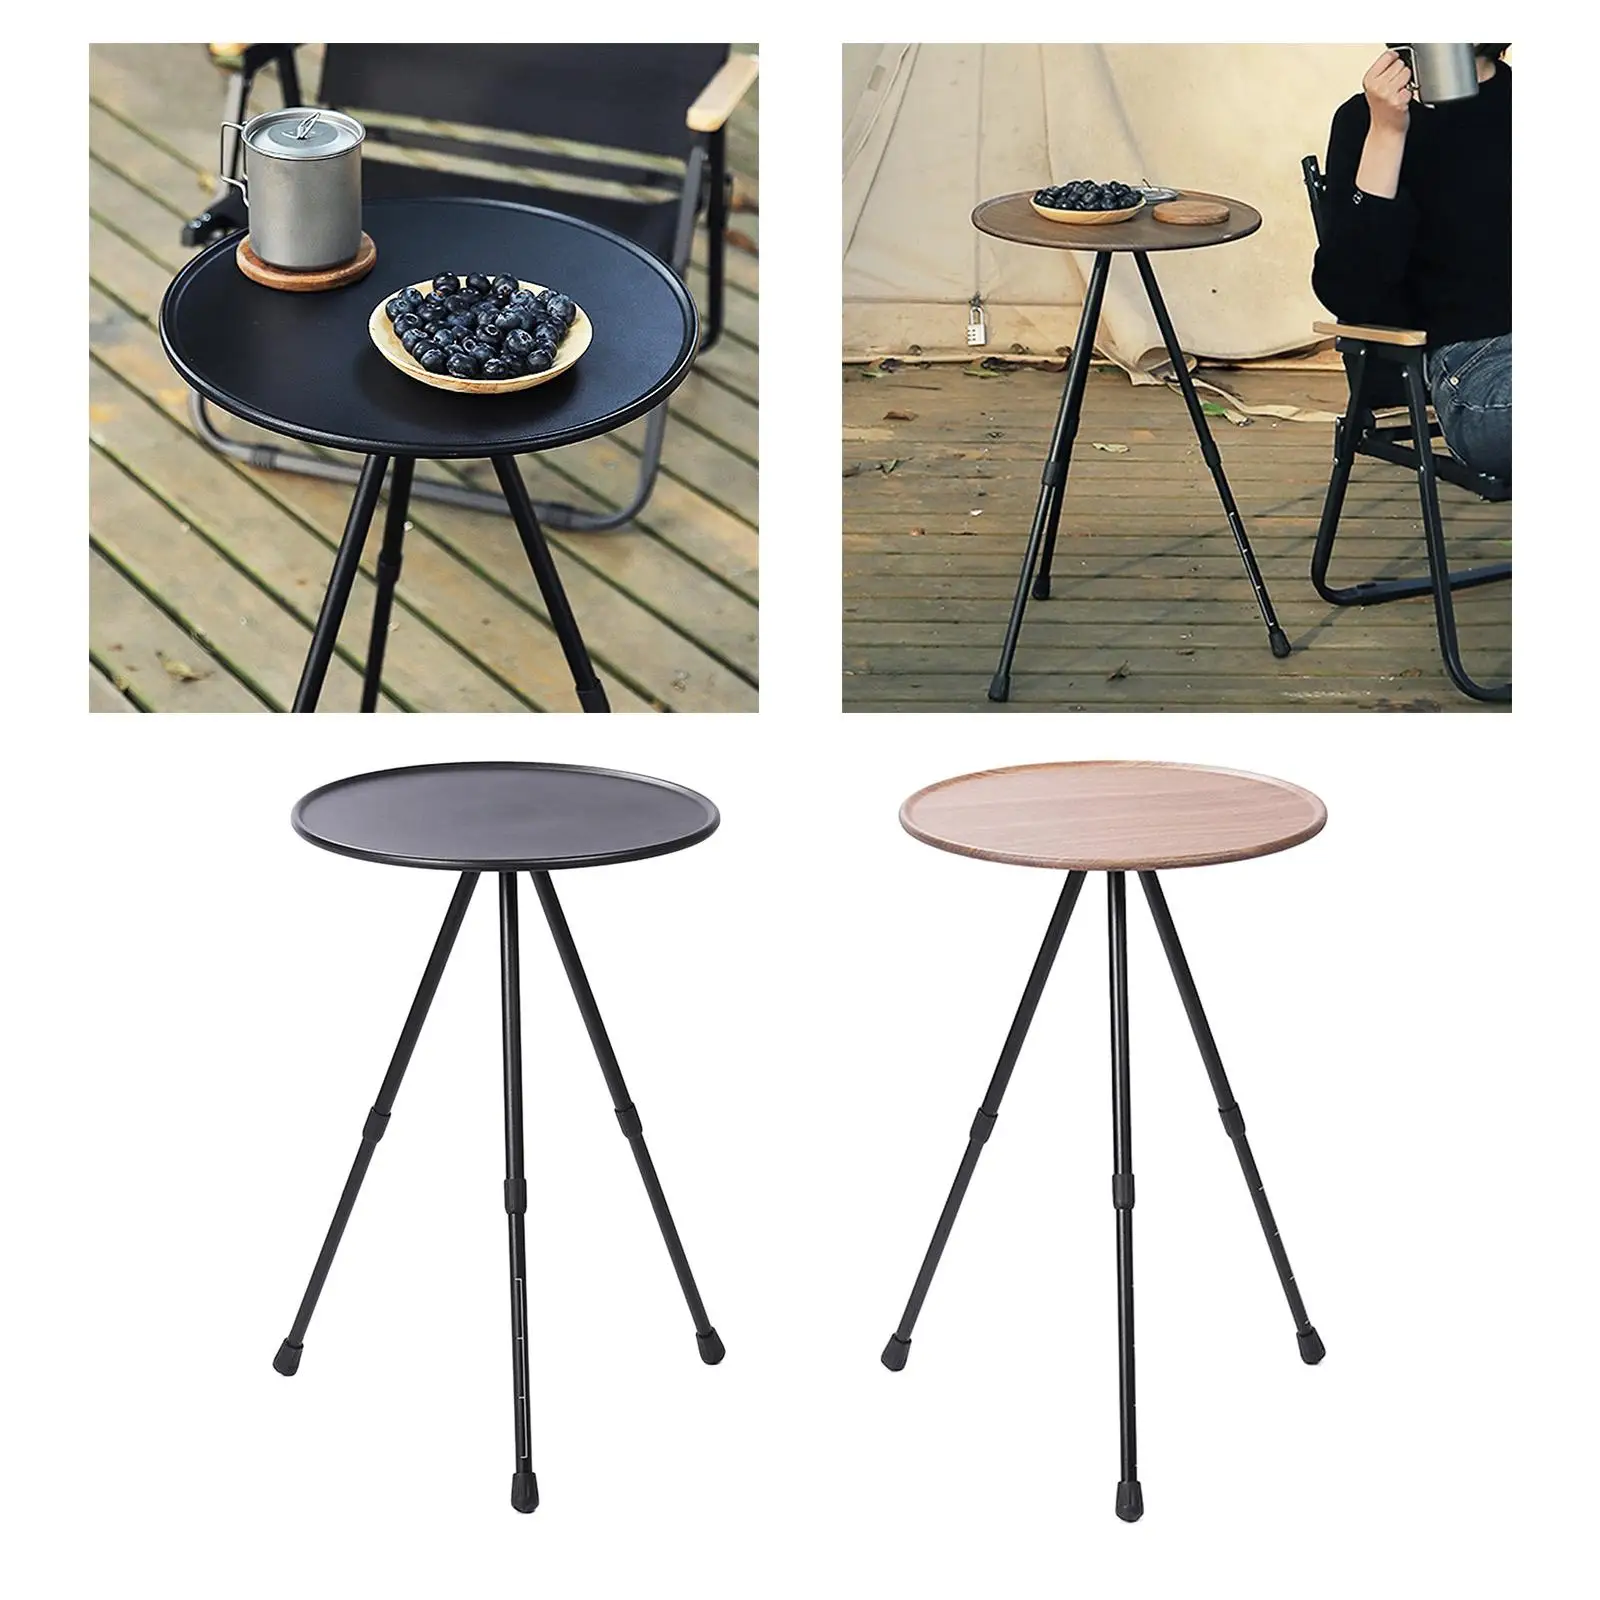 Foldable Camping Table Retractable Aluminum Alloy Three-Legged Dining Table Multifunctional for Camping Picnic Outdoor